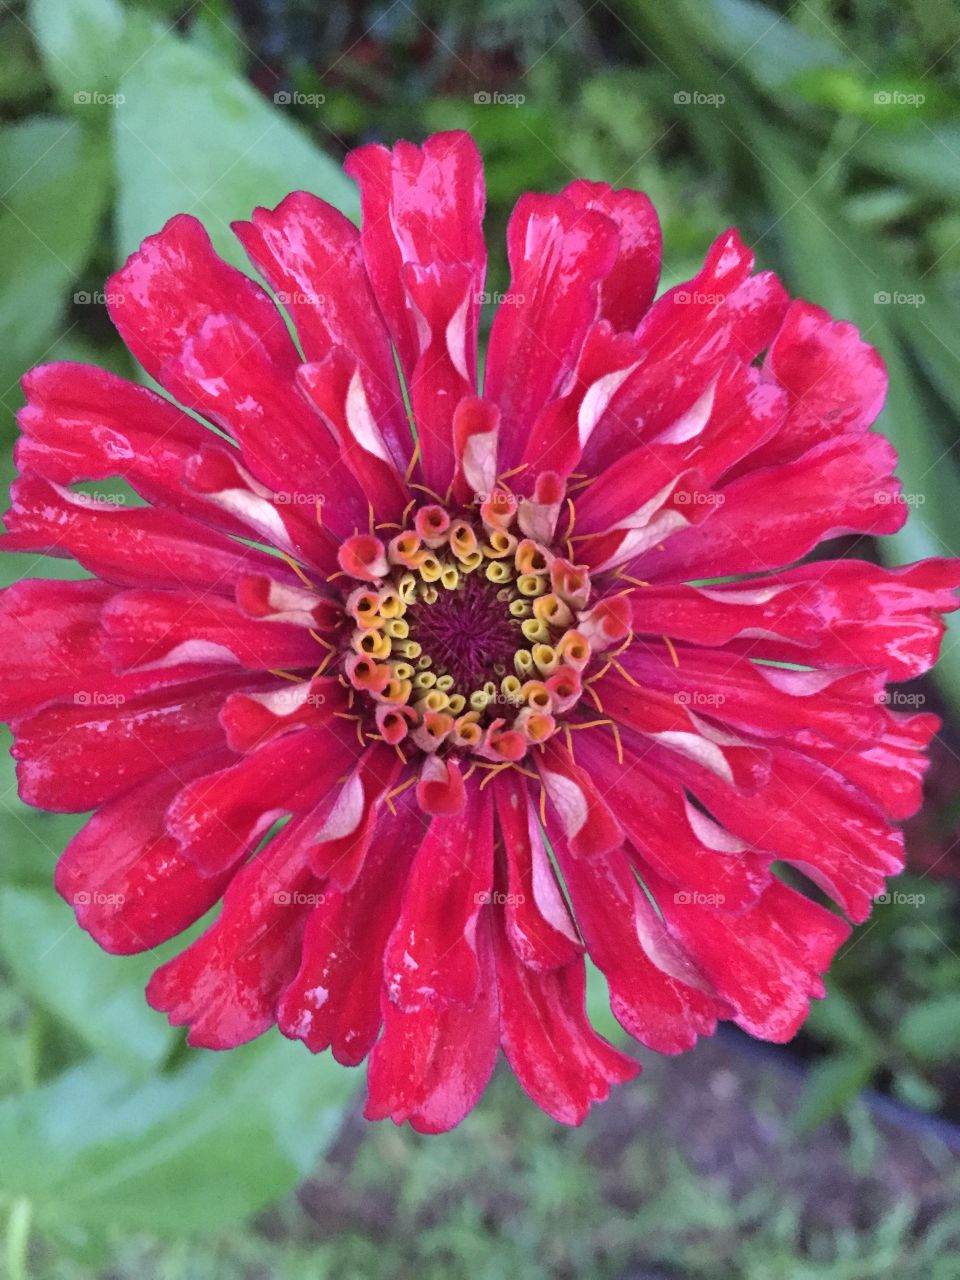 Red and smudge of white pinwheel zinnia flower.